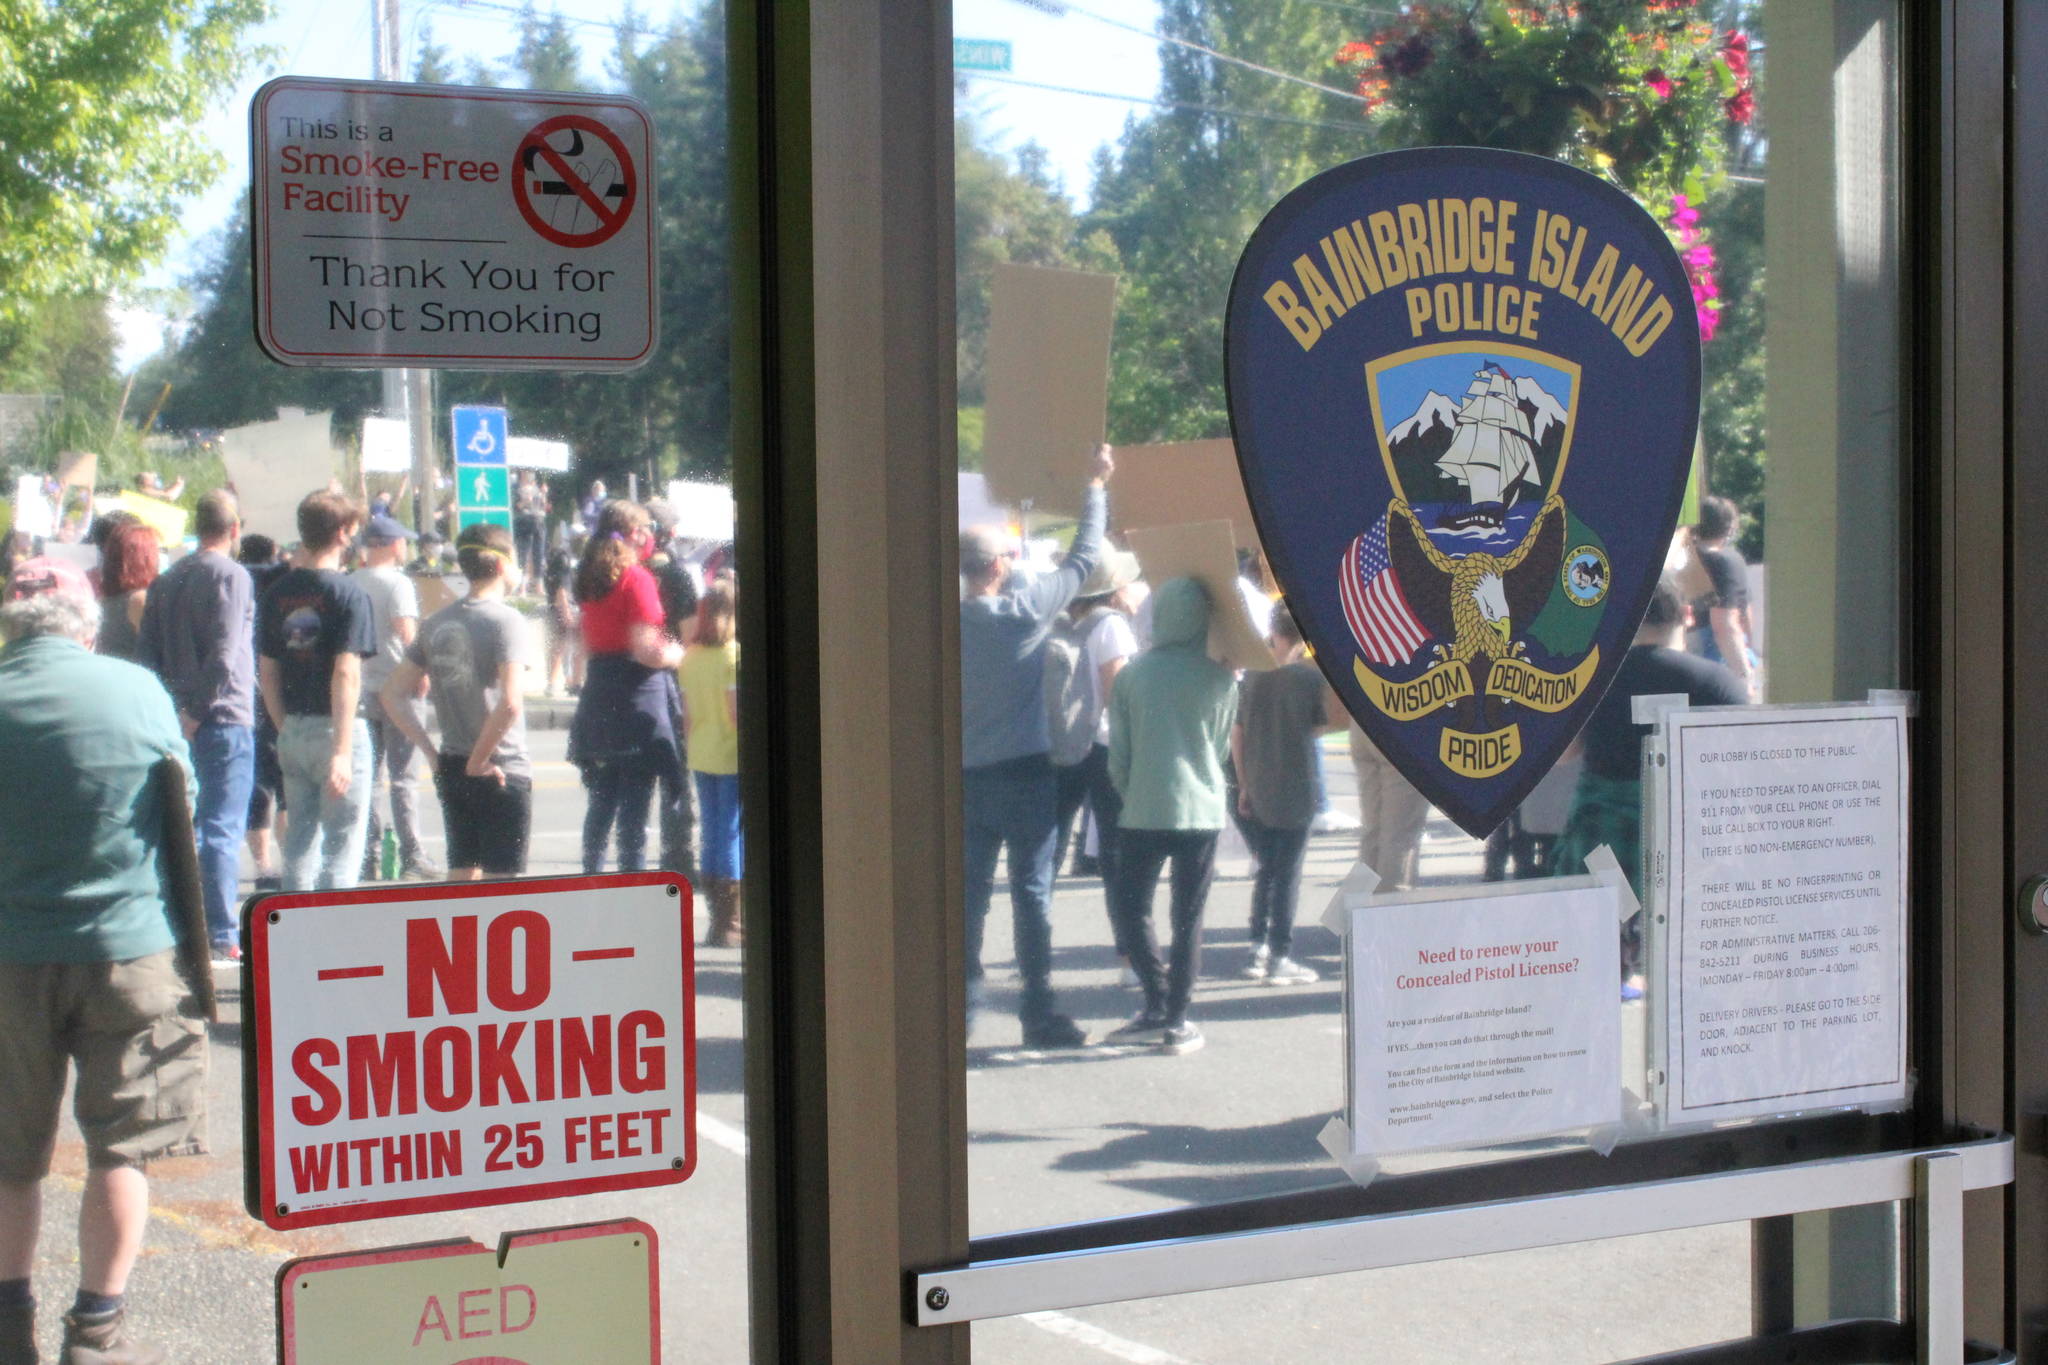 Protesters gather in front of the Bainbridge Island police station following the May 25 death of George Floyd at the hands of Minneapolis police. Photo by Nick Twietmeyer